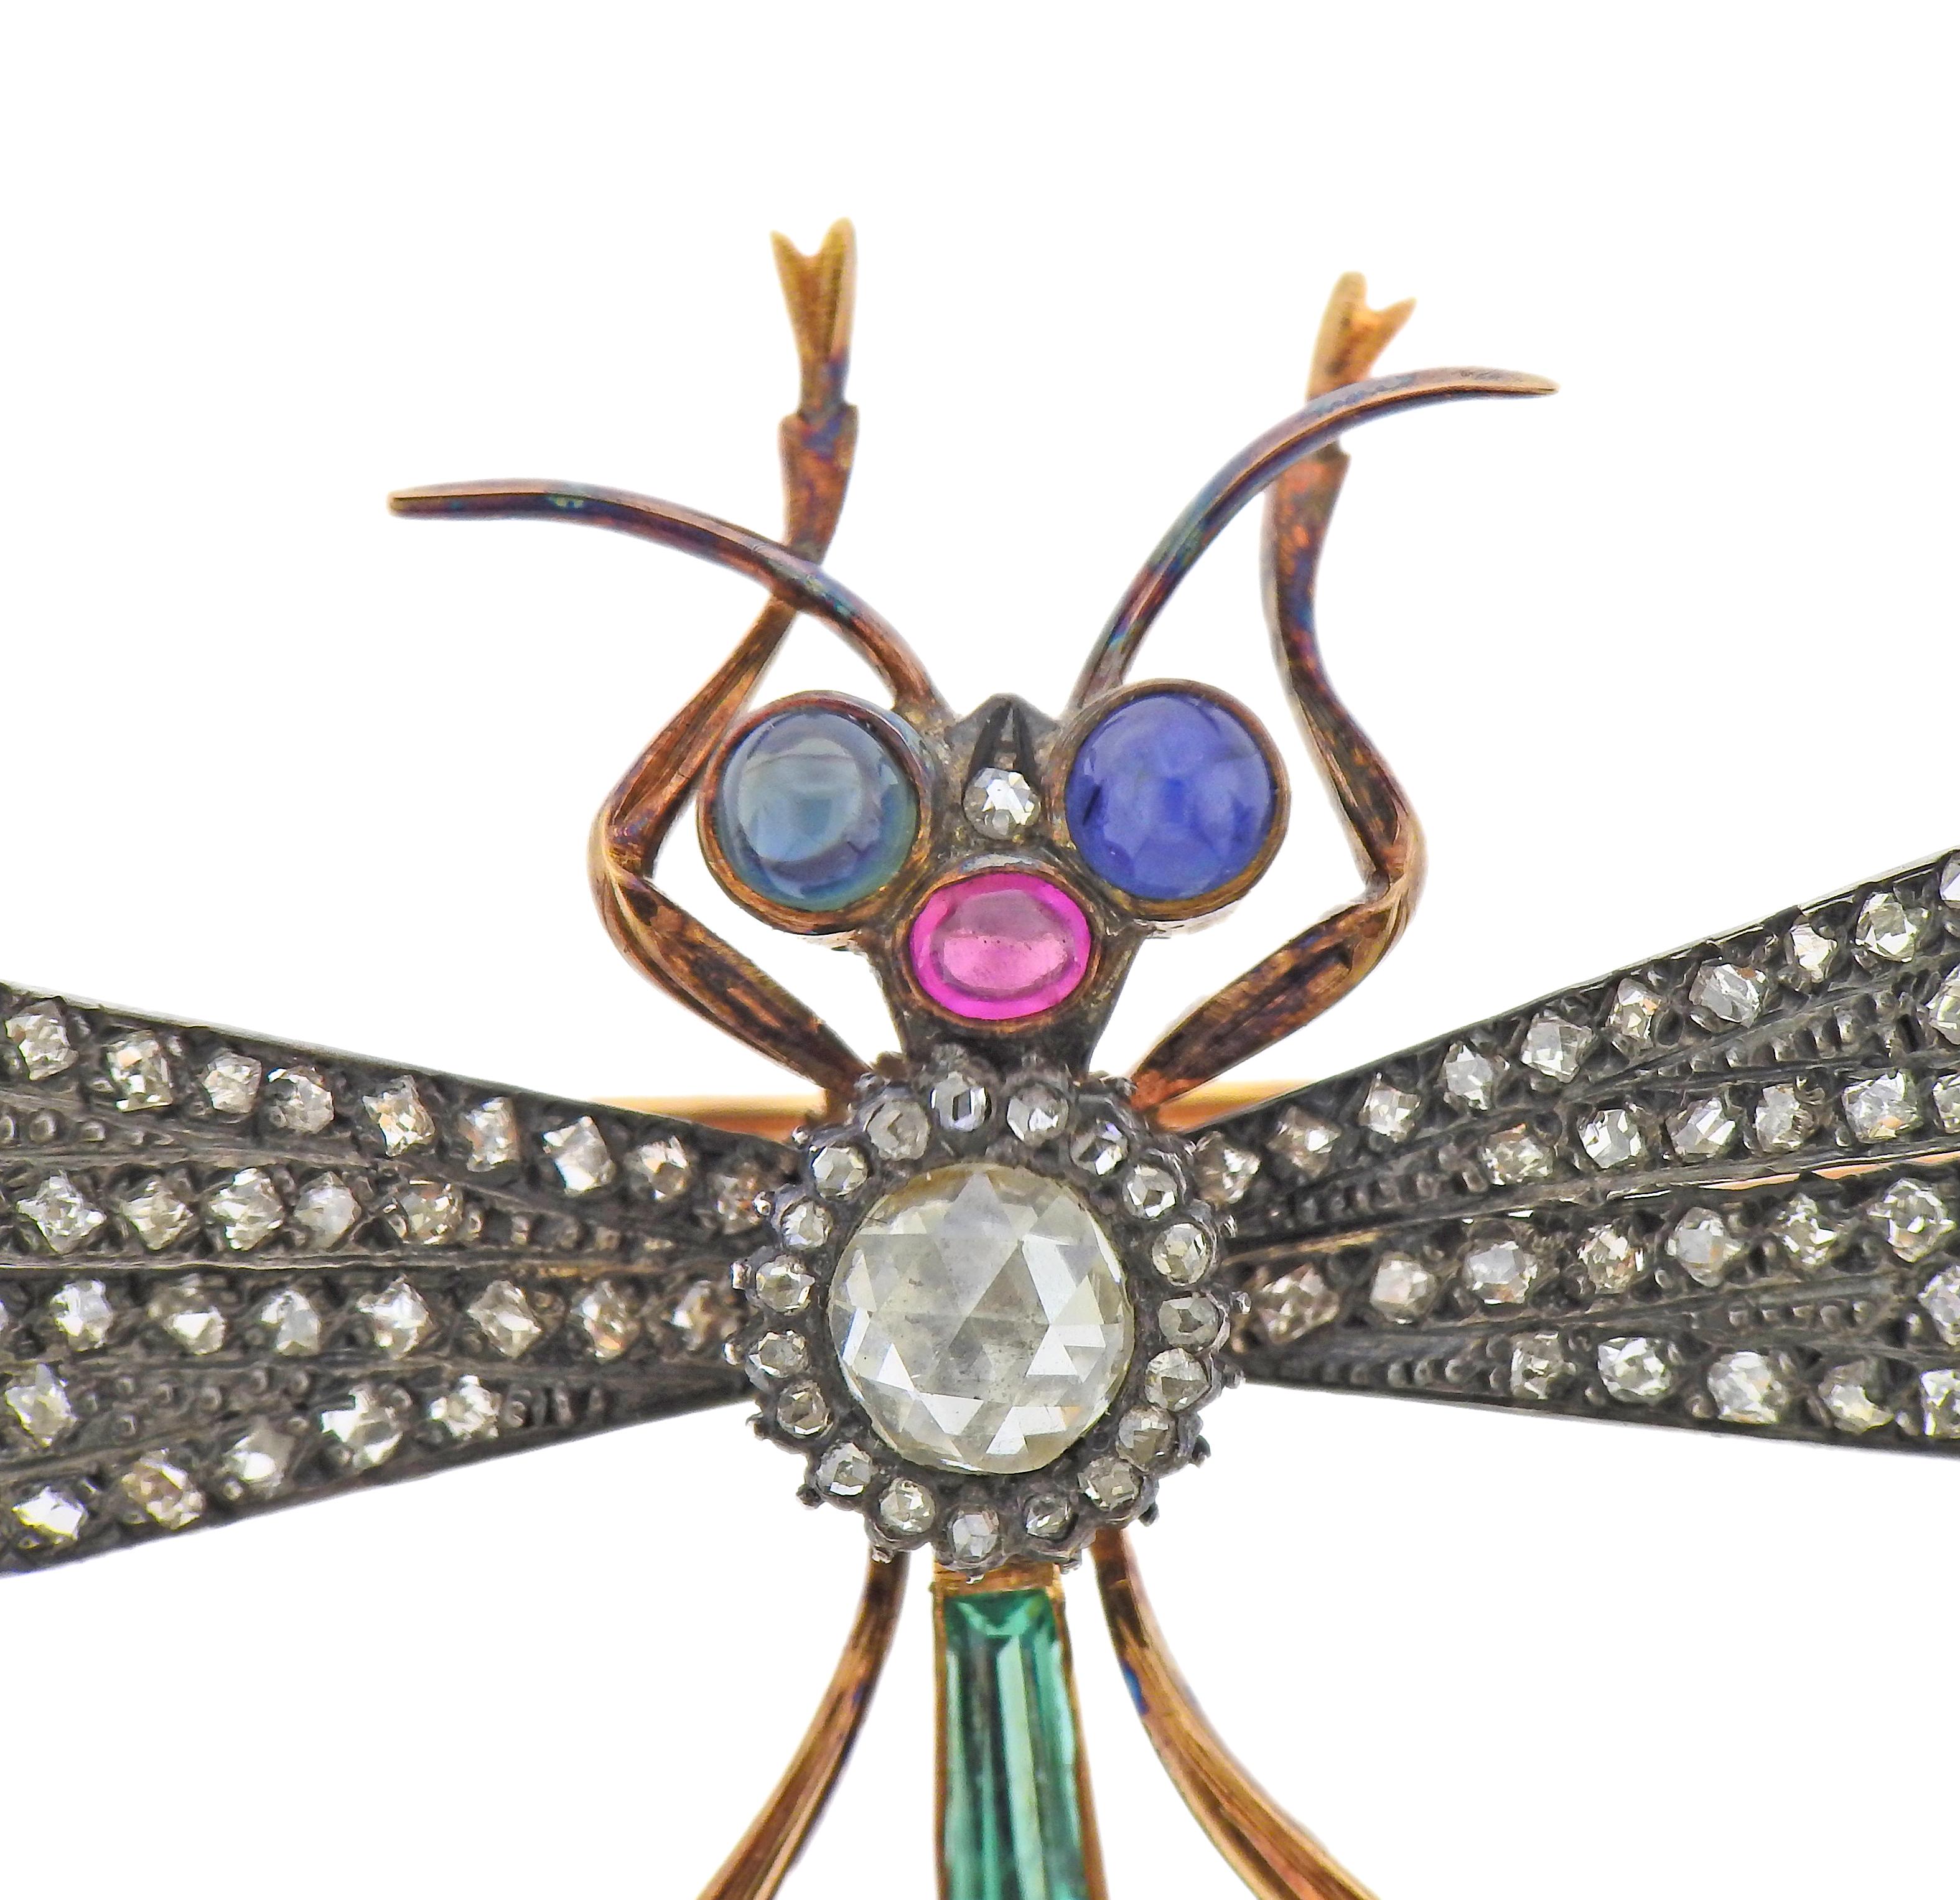 Large silver and 18k gold dragonfly brooch, set with rose cut diamonds (center stone is approx. 5.3 x 5.4mm), sapphire eyes, rubies and emeralds.  Brooch measures 80mm x 90mm. Weight - 22.1 grams.